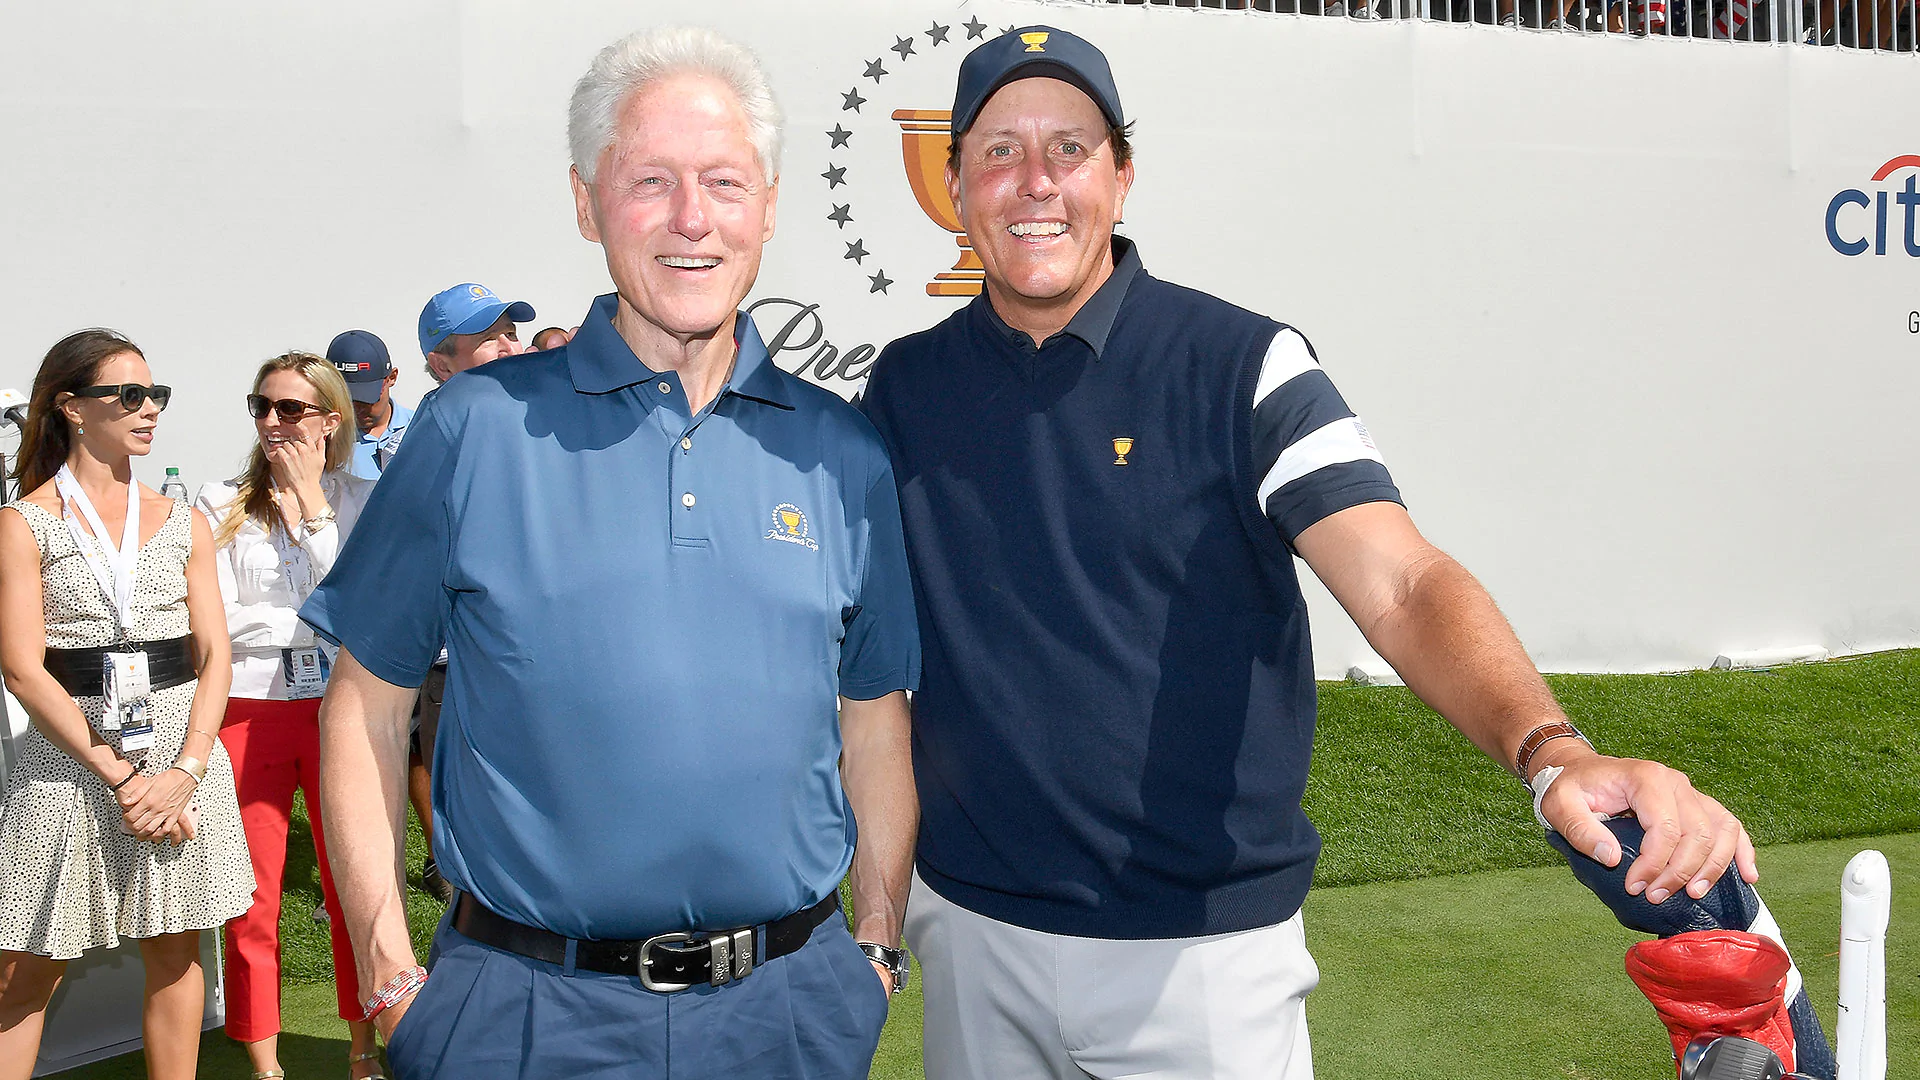 Clinton talks strategy with U.S. team on first tee